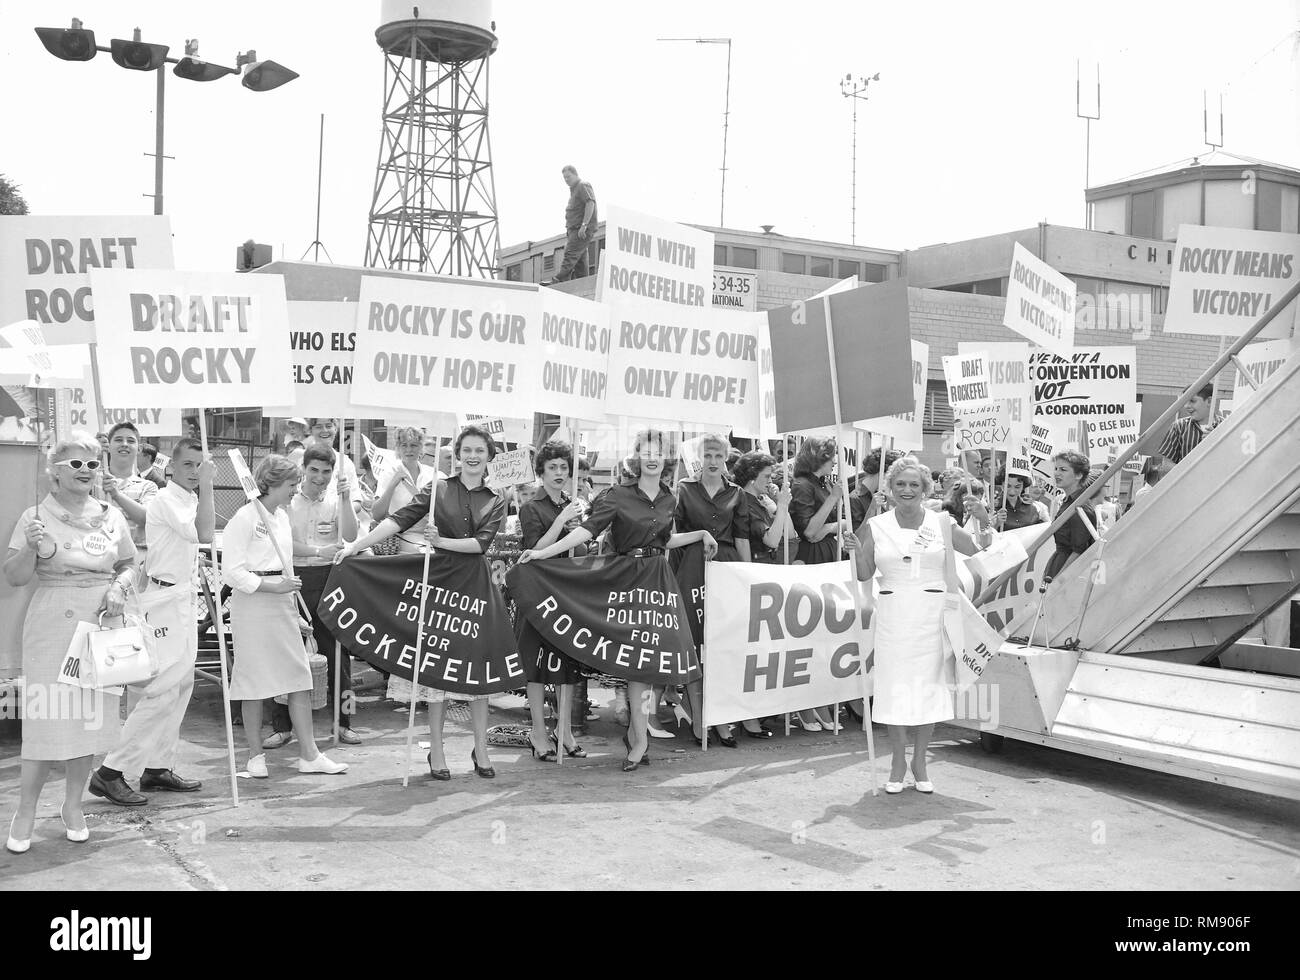 Supporters of Gov. Nelson Rockefeller, including the 'Petticoats Politicos for Rockefeller' group, await his arrival at Midway Airport for the Republican National Convention in 1960. Stock Photo